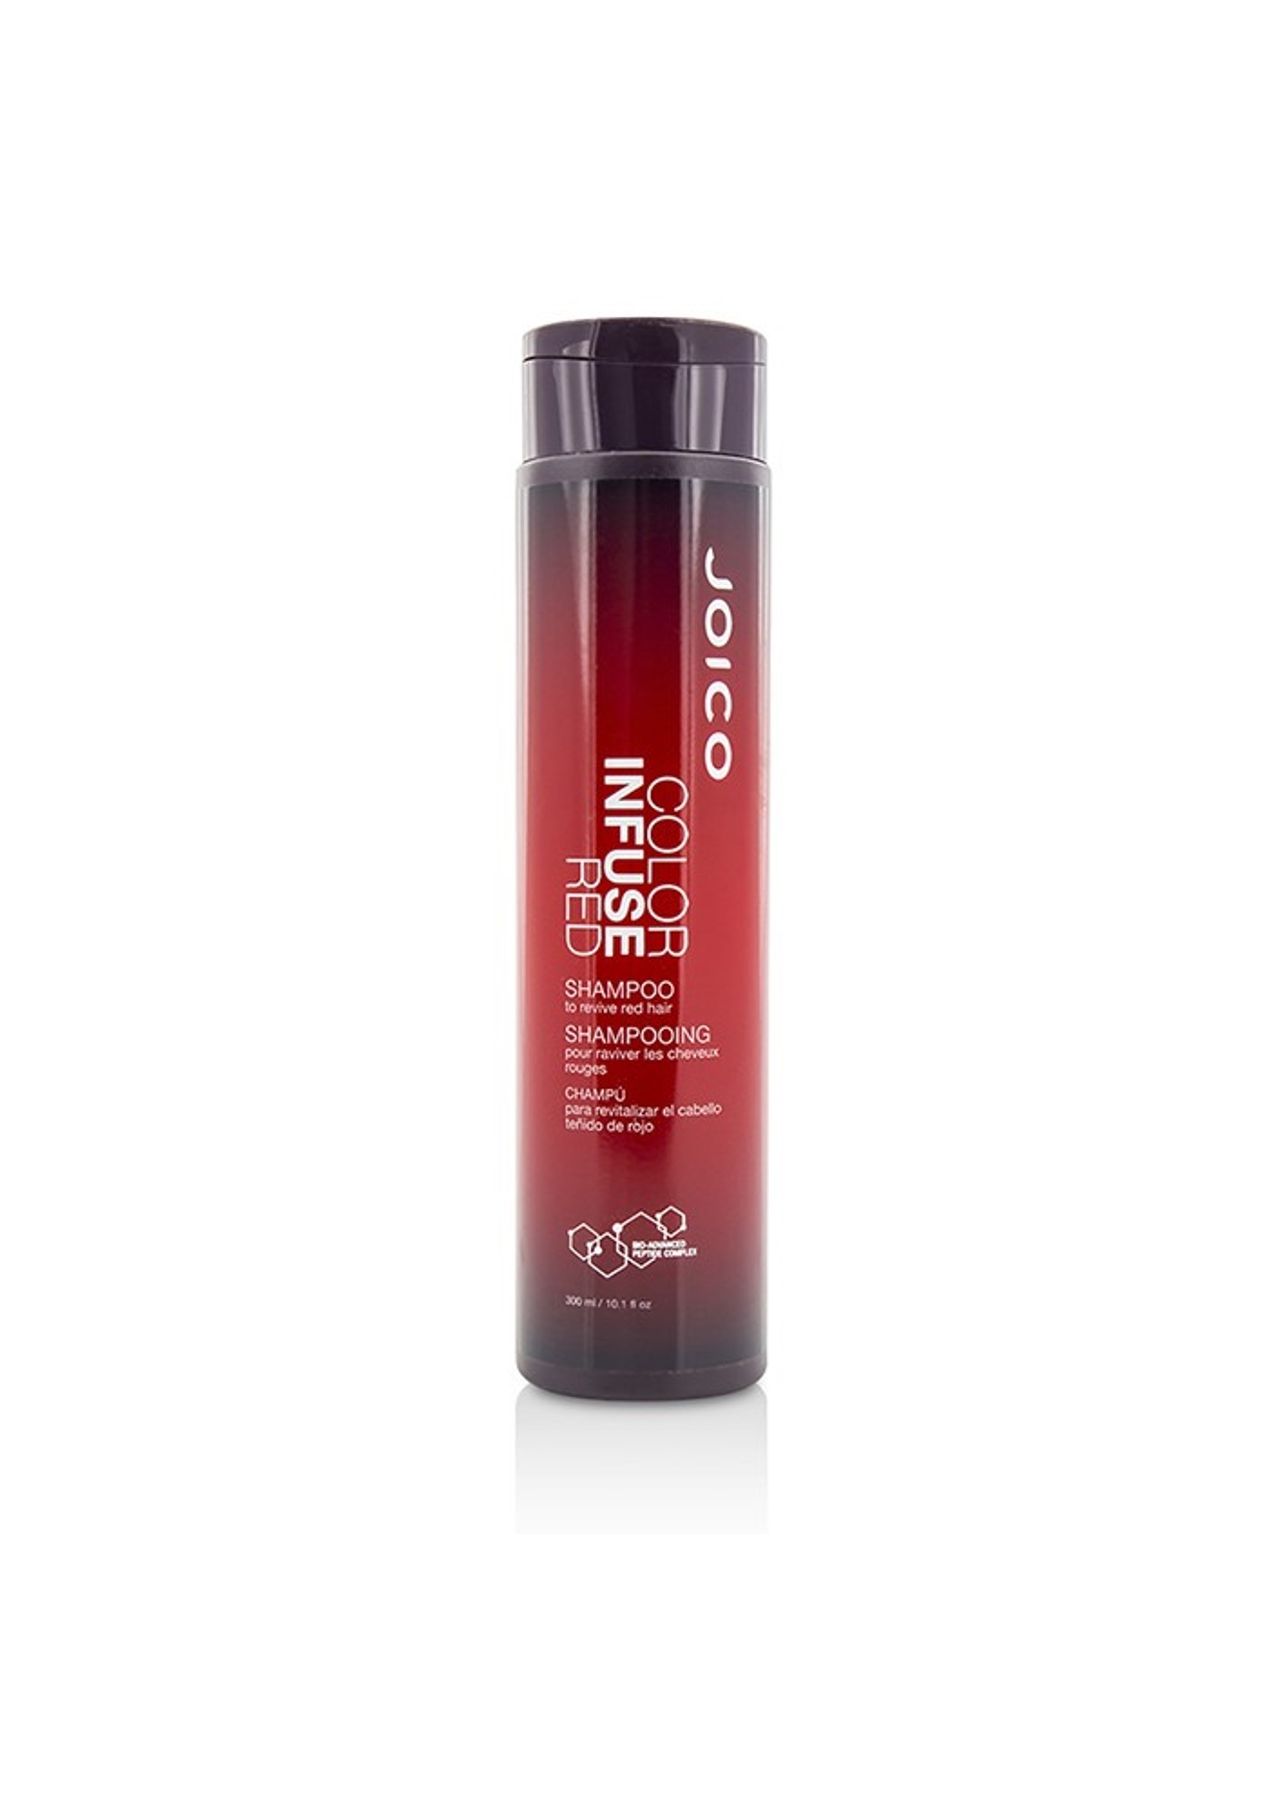 joico color infuse red